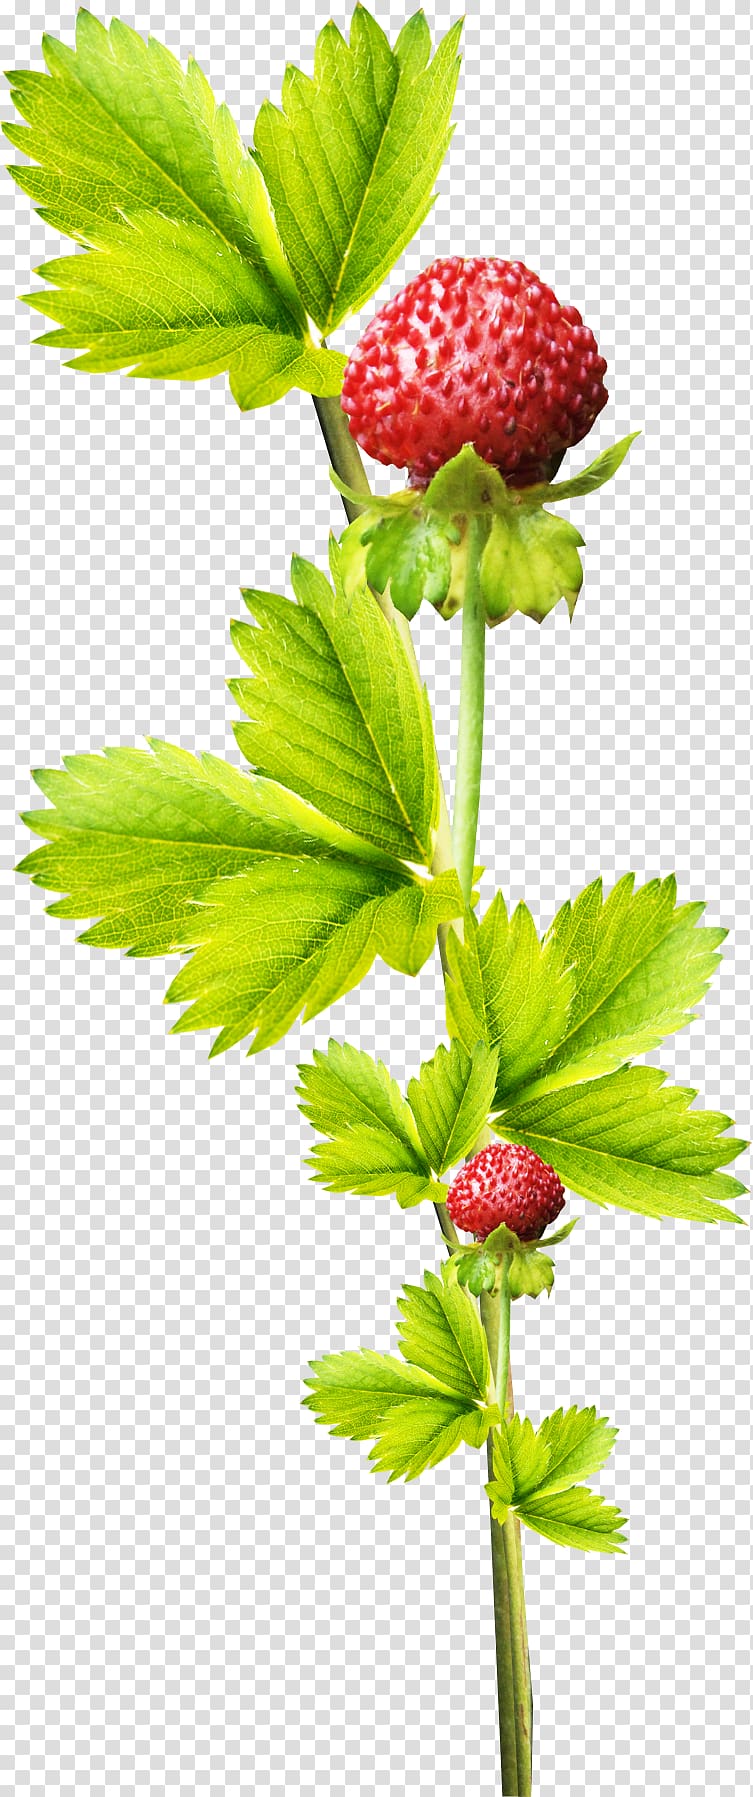 Strawberry Aedmaasikas Fruit, Beautiful strawberry fruit branch transparent background PNG clipart